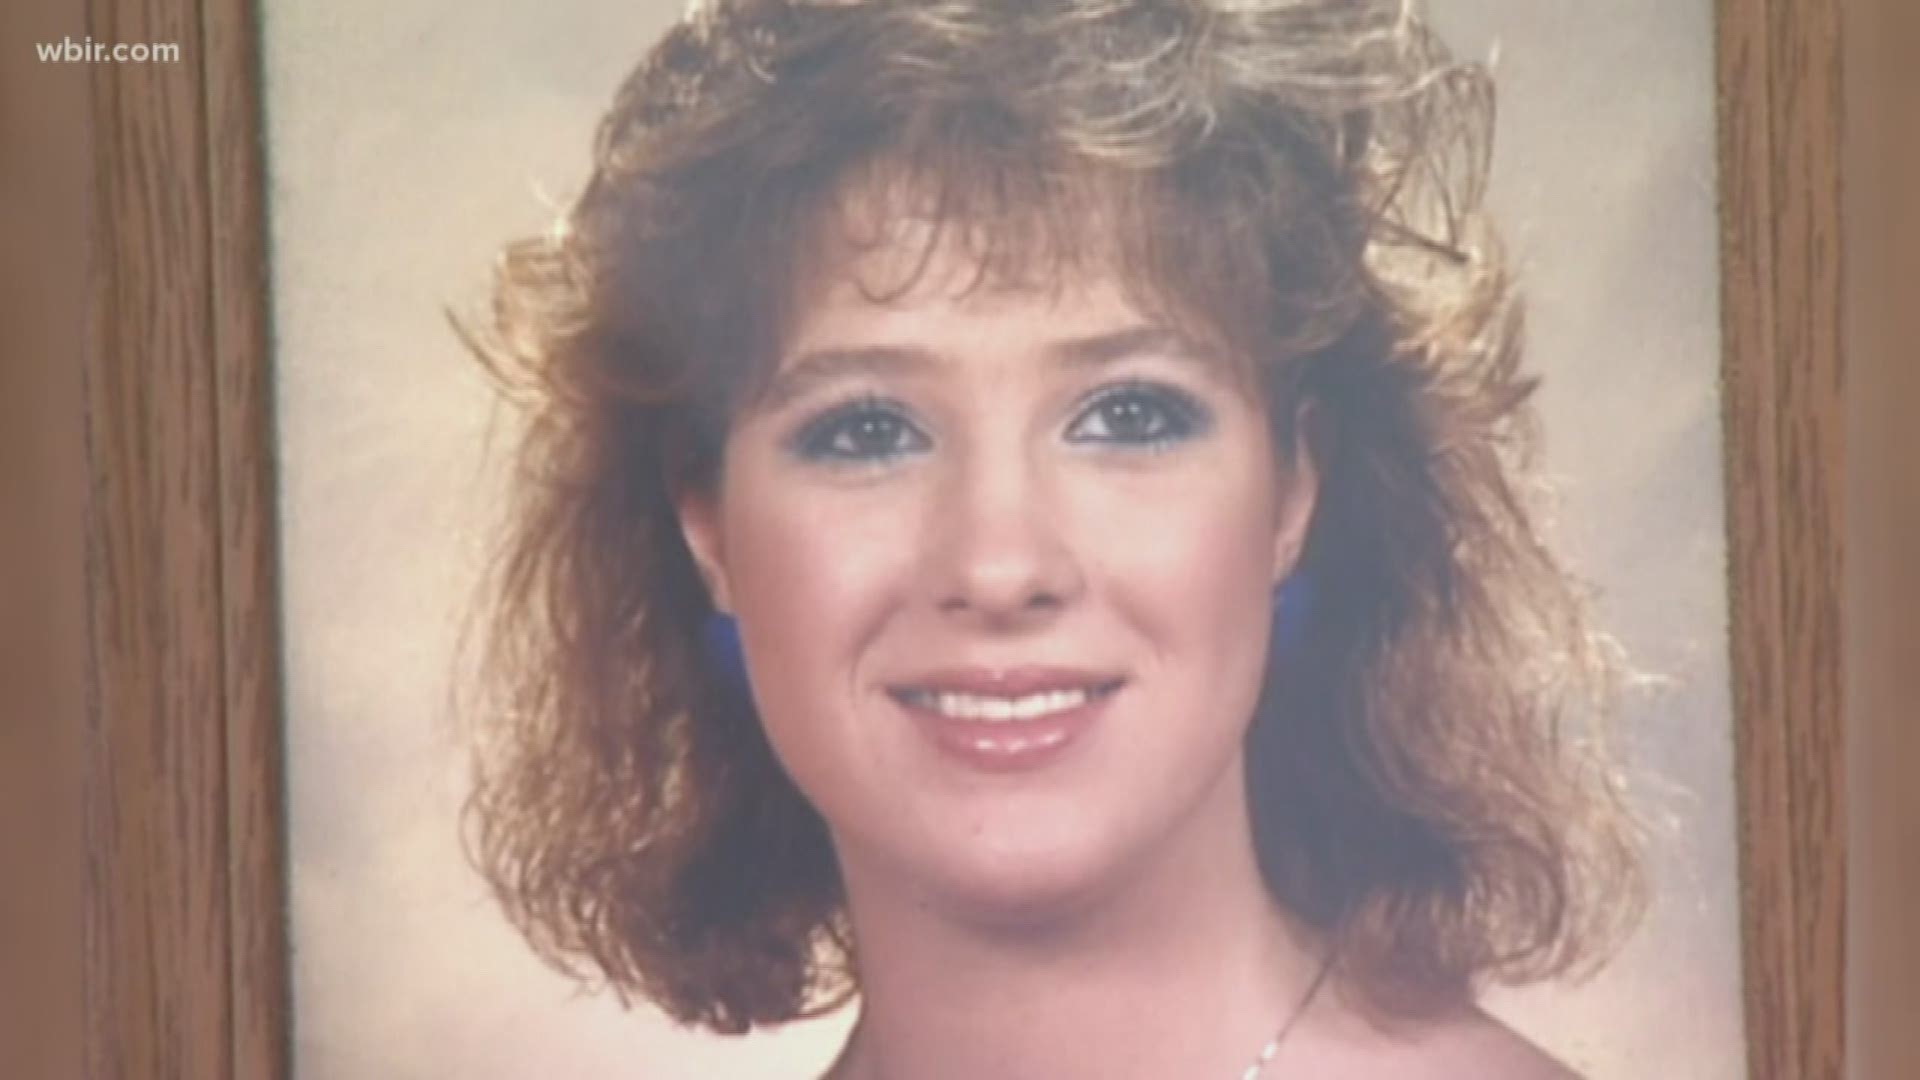 Lee Hall is set to be executed Thursday for the 1991 murder of his ex-girlfriend. Traci Crozier died after he set her car on fire with her inside.